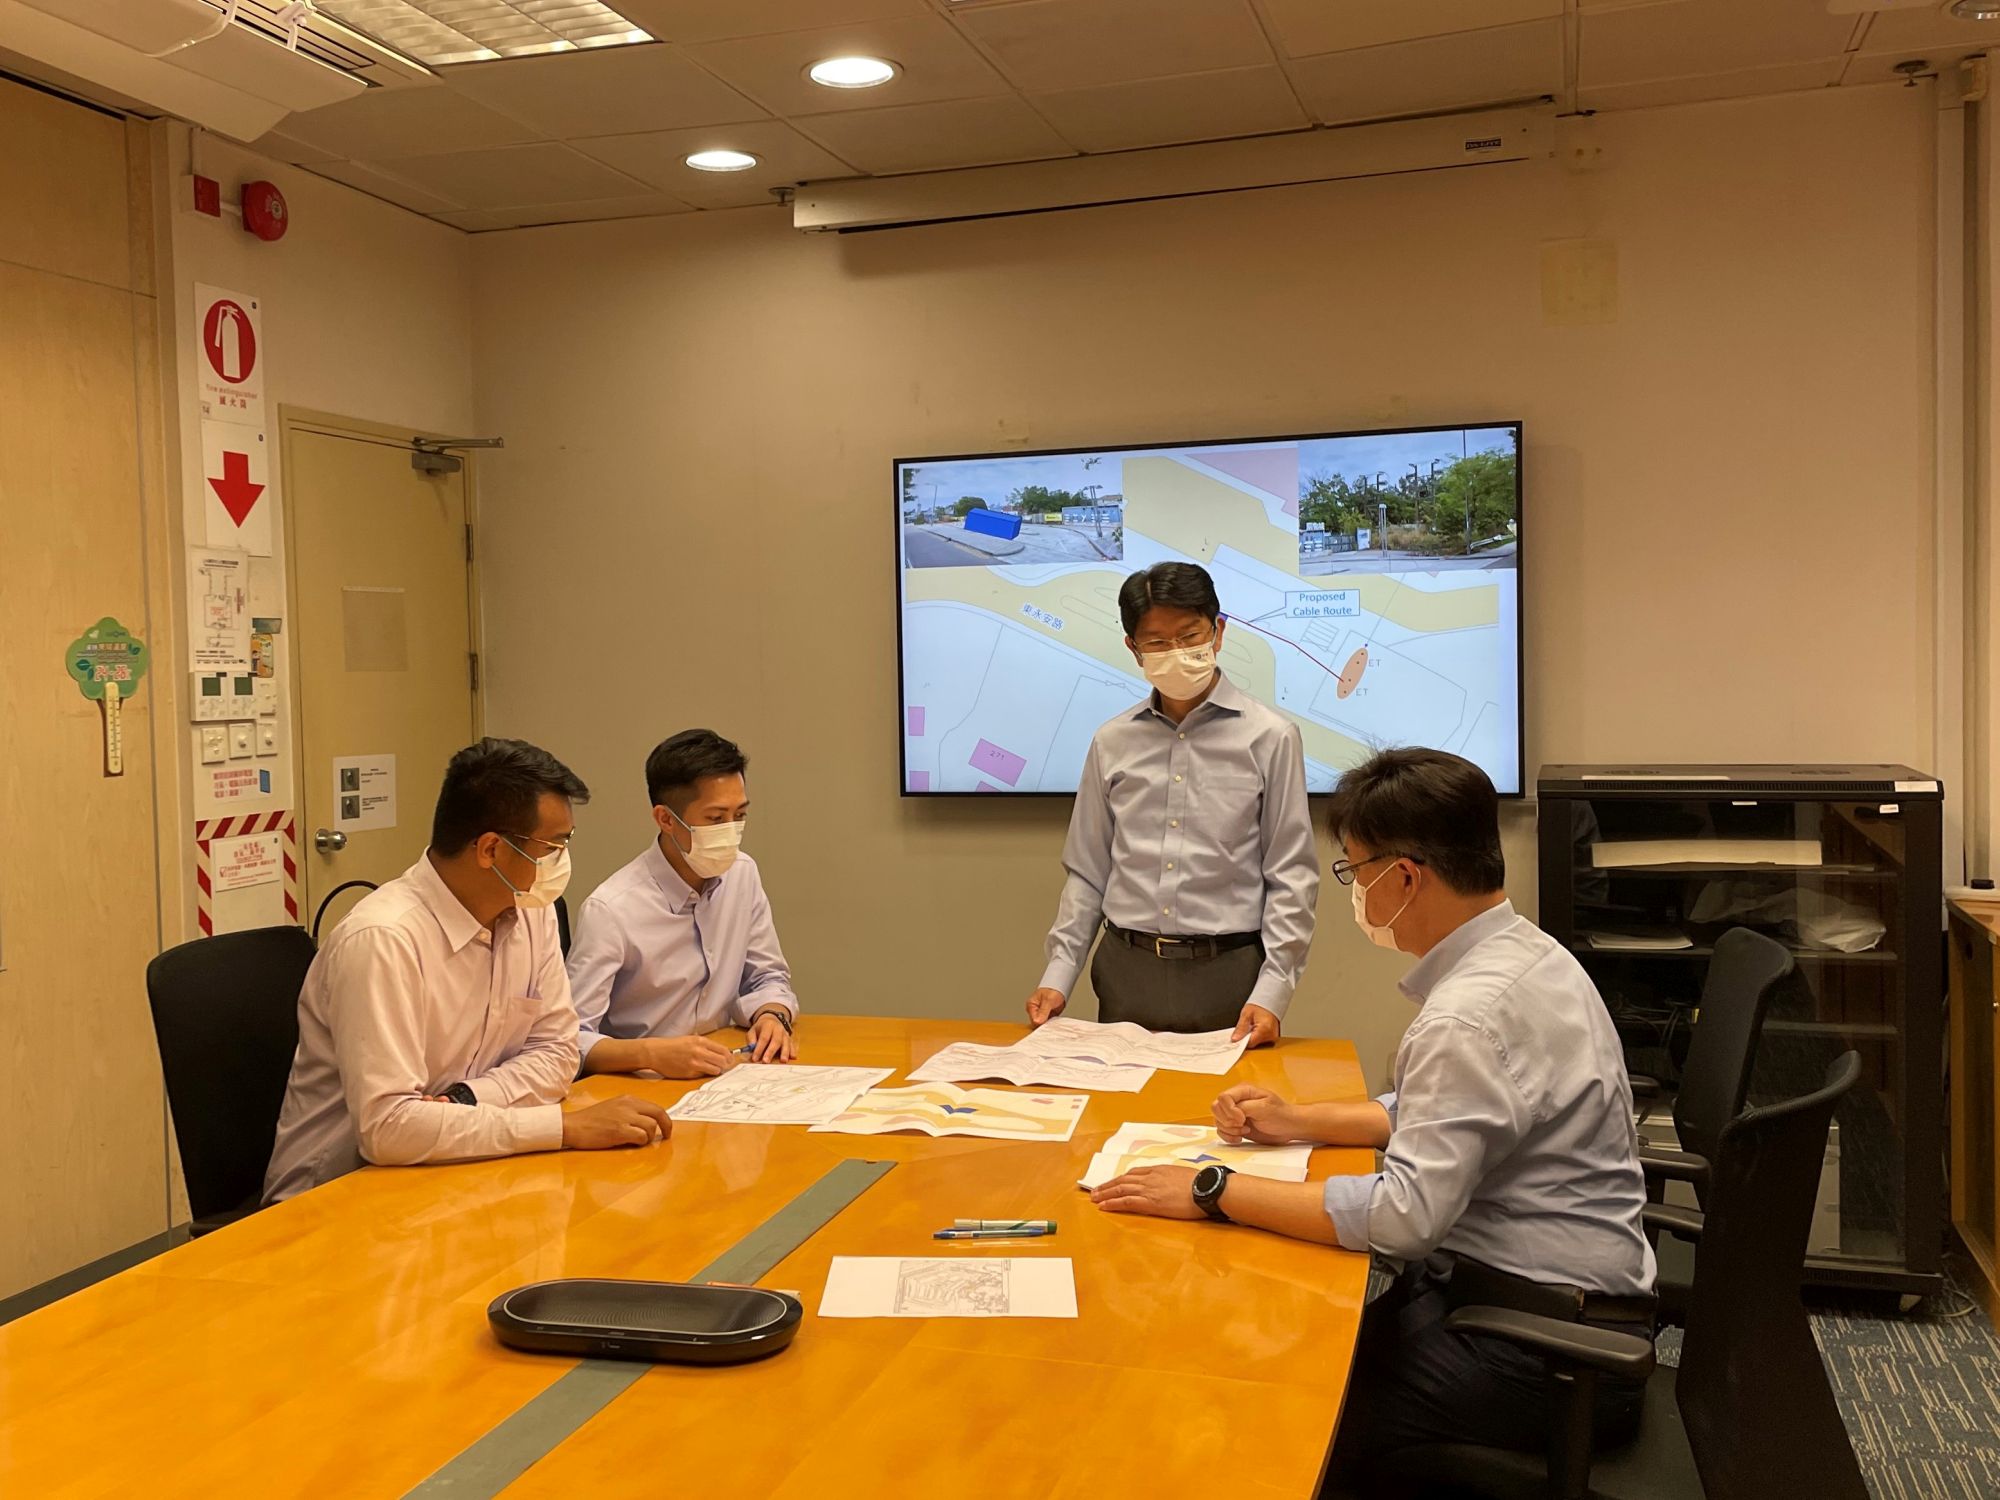 Mr Jeffrey LEUNG (second left) says that the engineering team starts working on power supply planning and research to build the supply networks for the facilities immediately after learning that the Government has to construct a number of CIFs.